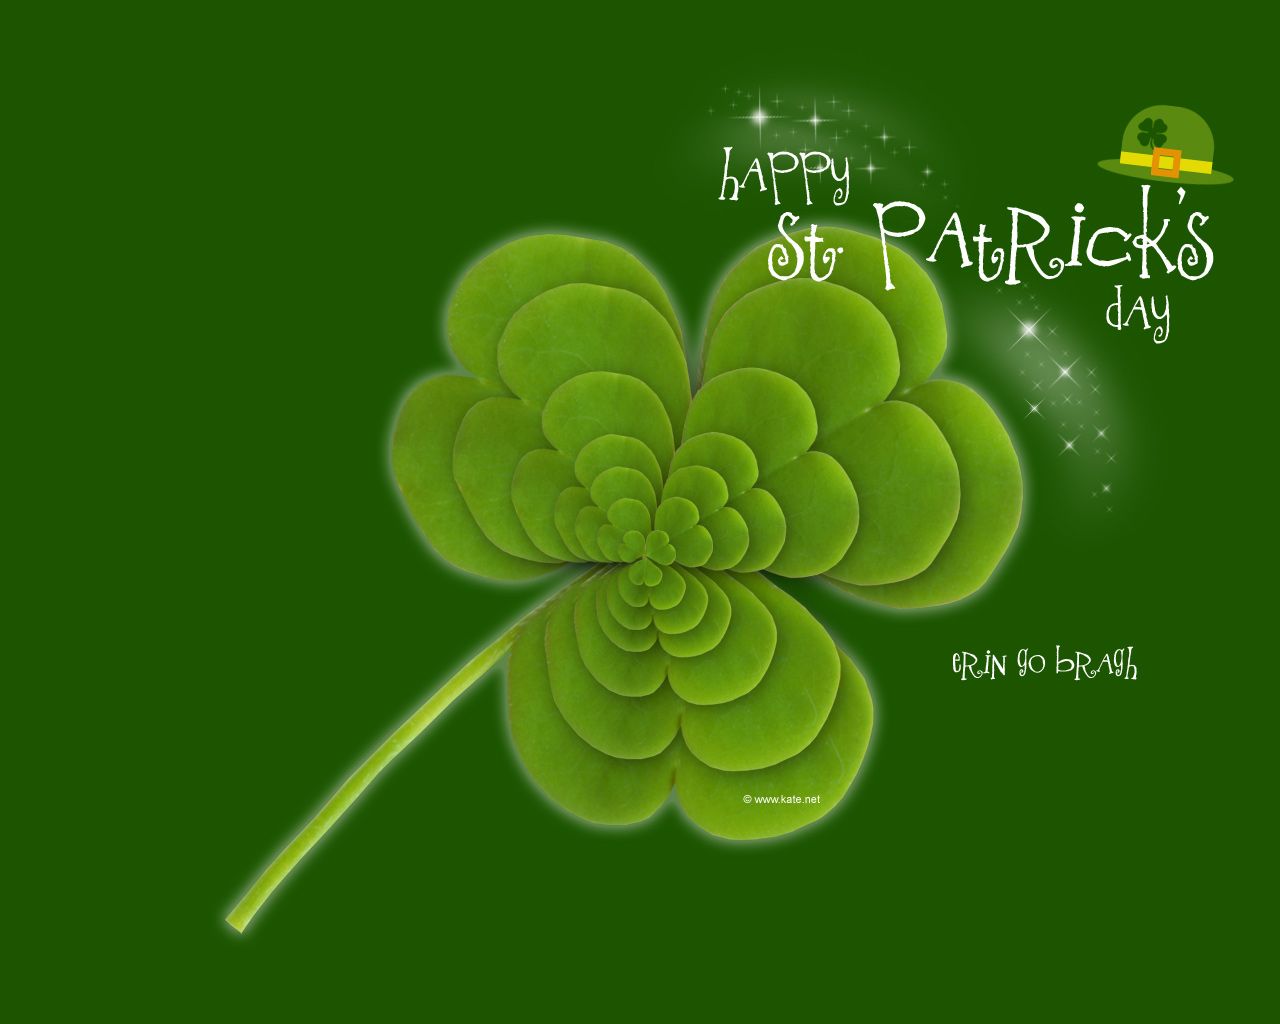 St. Patricks Day Wallpapers by Kate.net